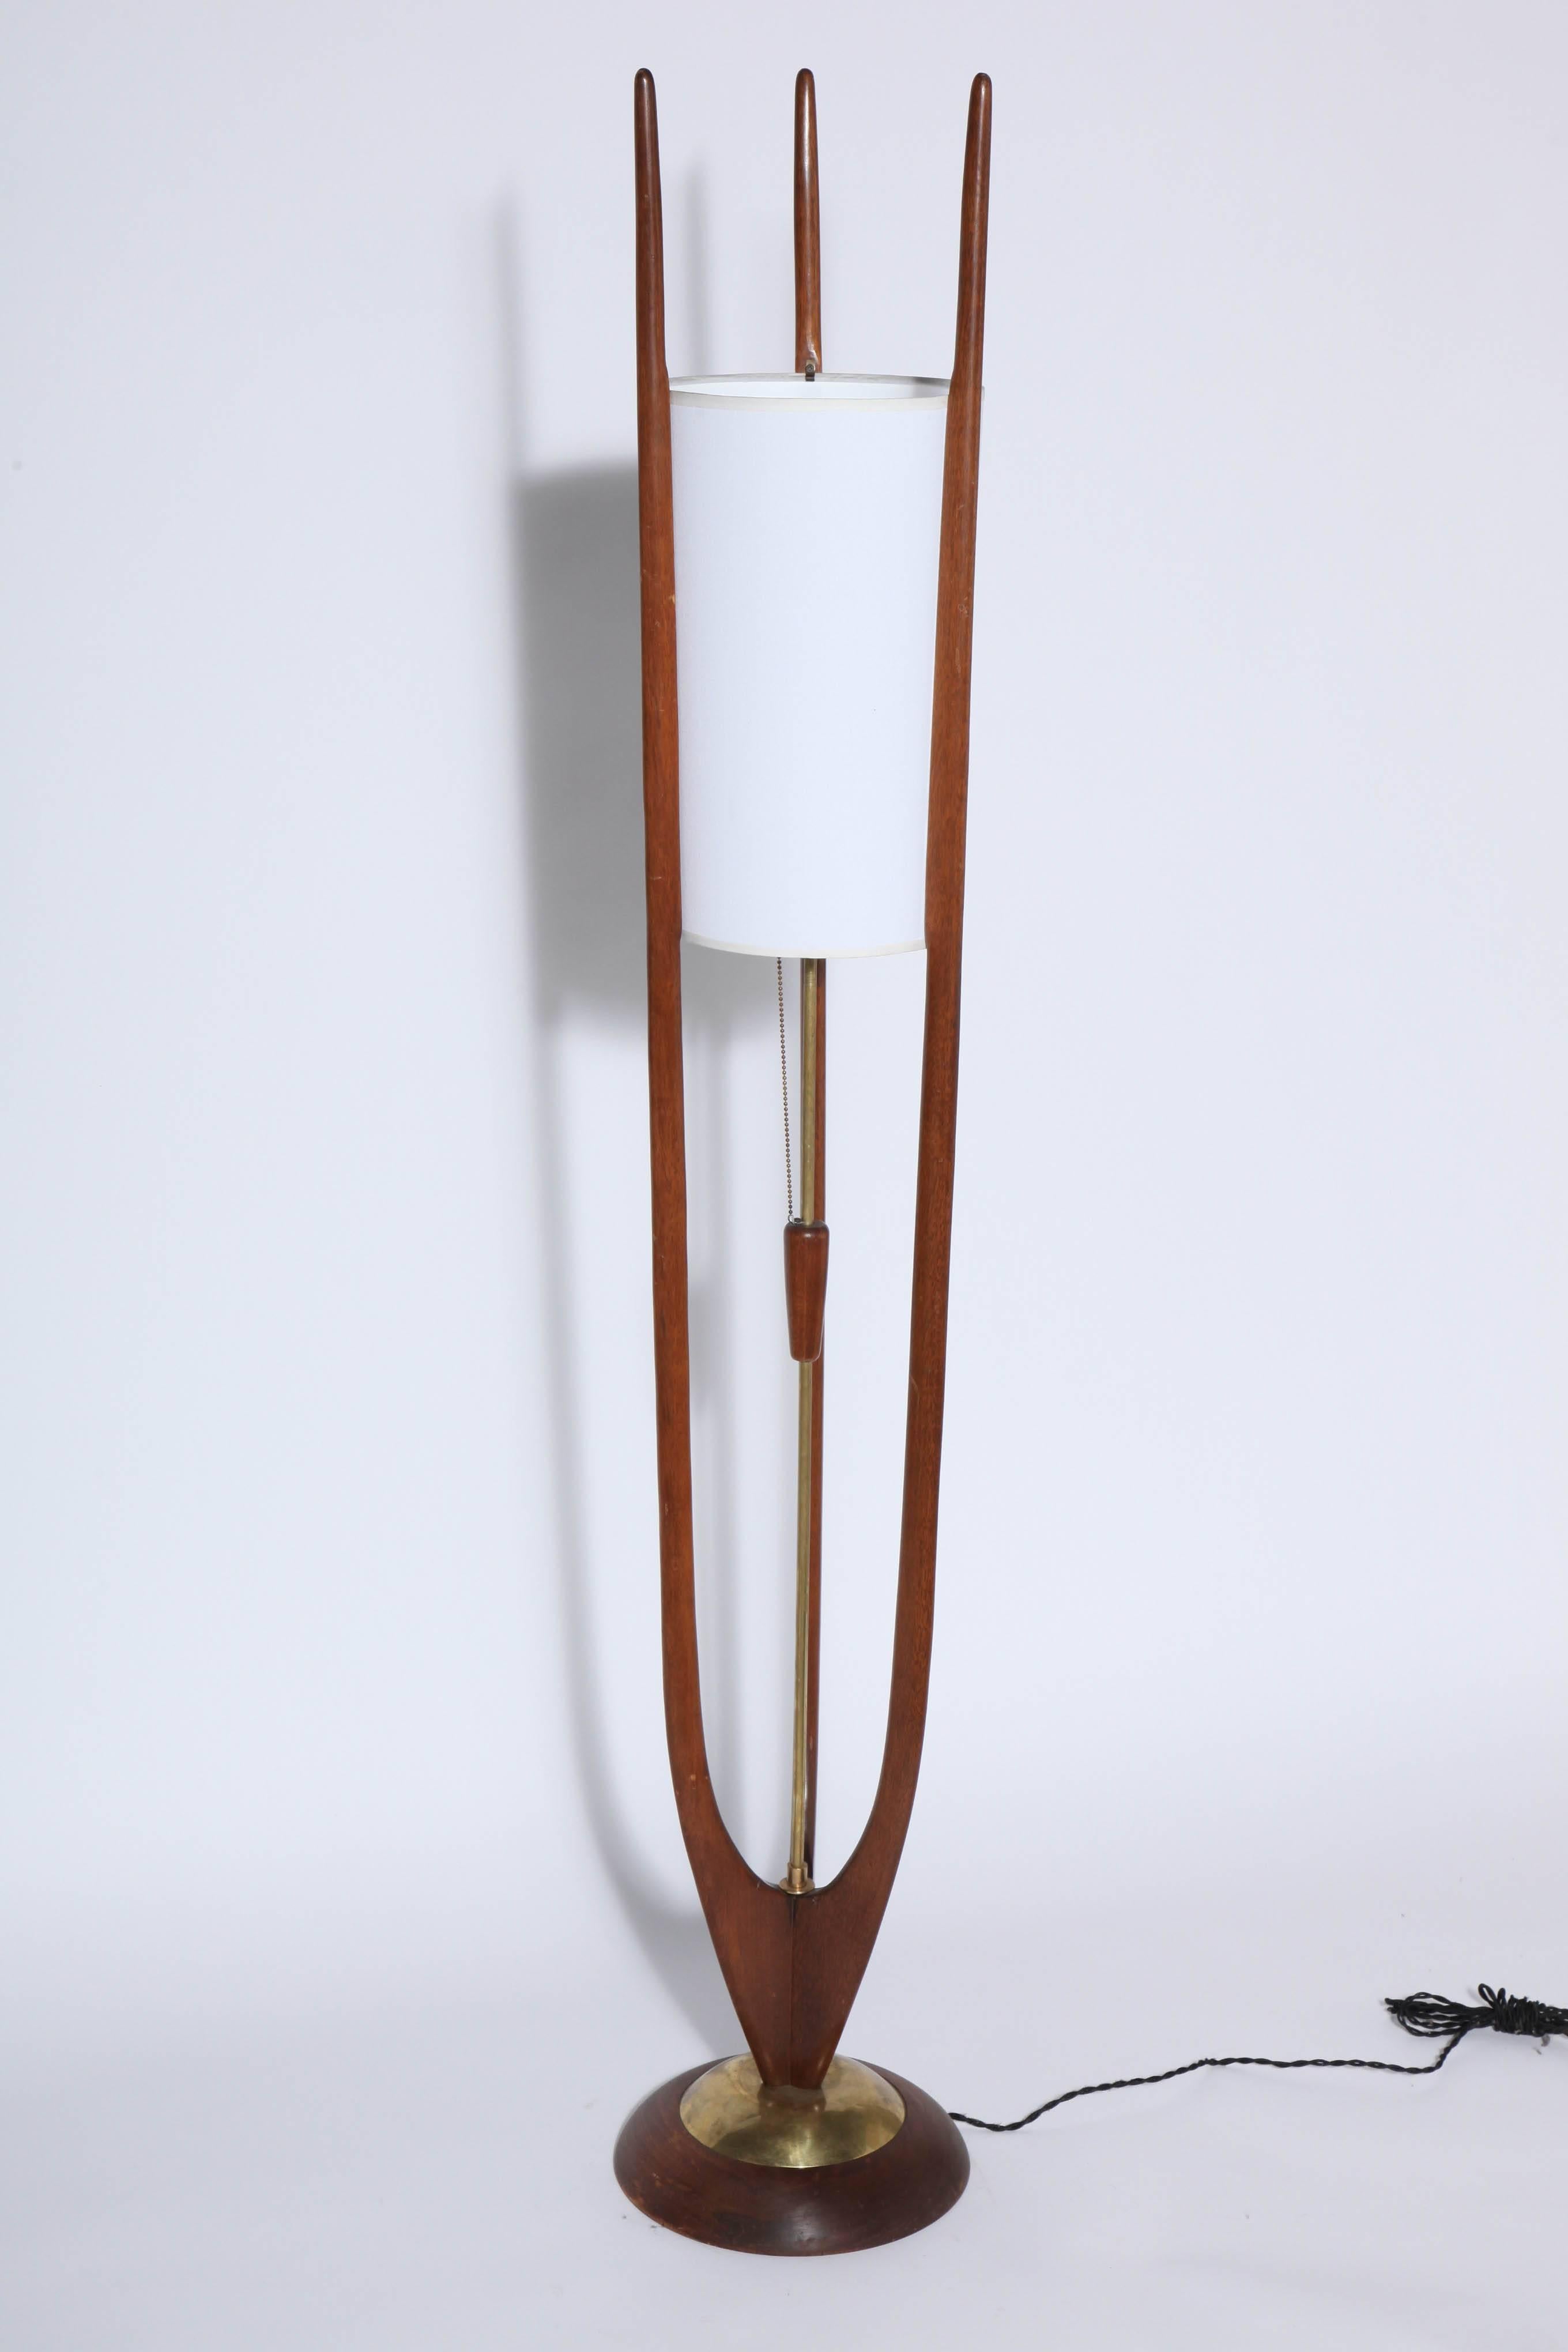 1950s Modeline of California sculpted walnut and brass accent floor lamp. Features tubular patinated Brass center column with walnut detailed pull chain on a 11